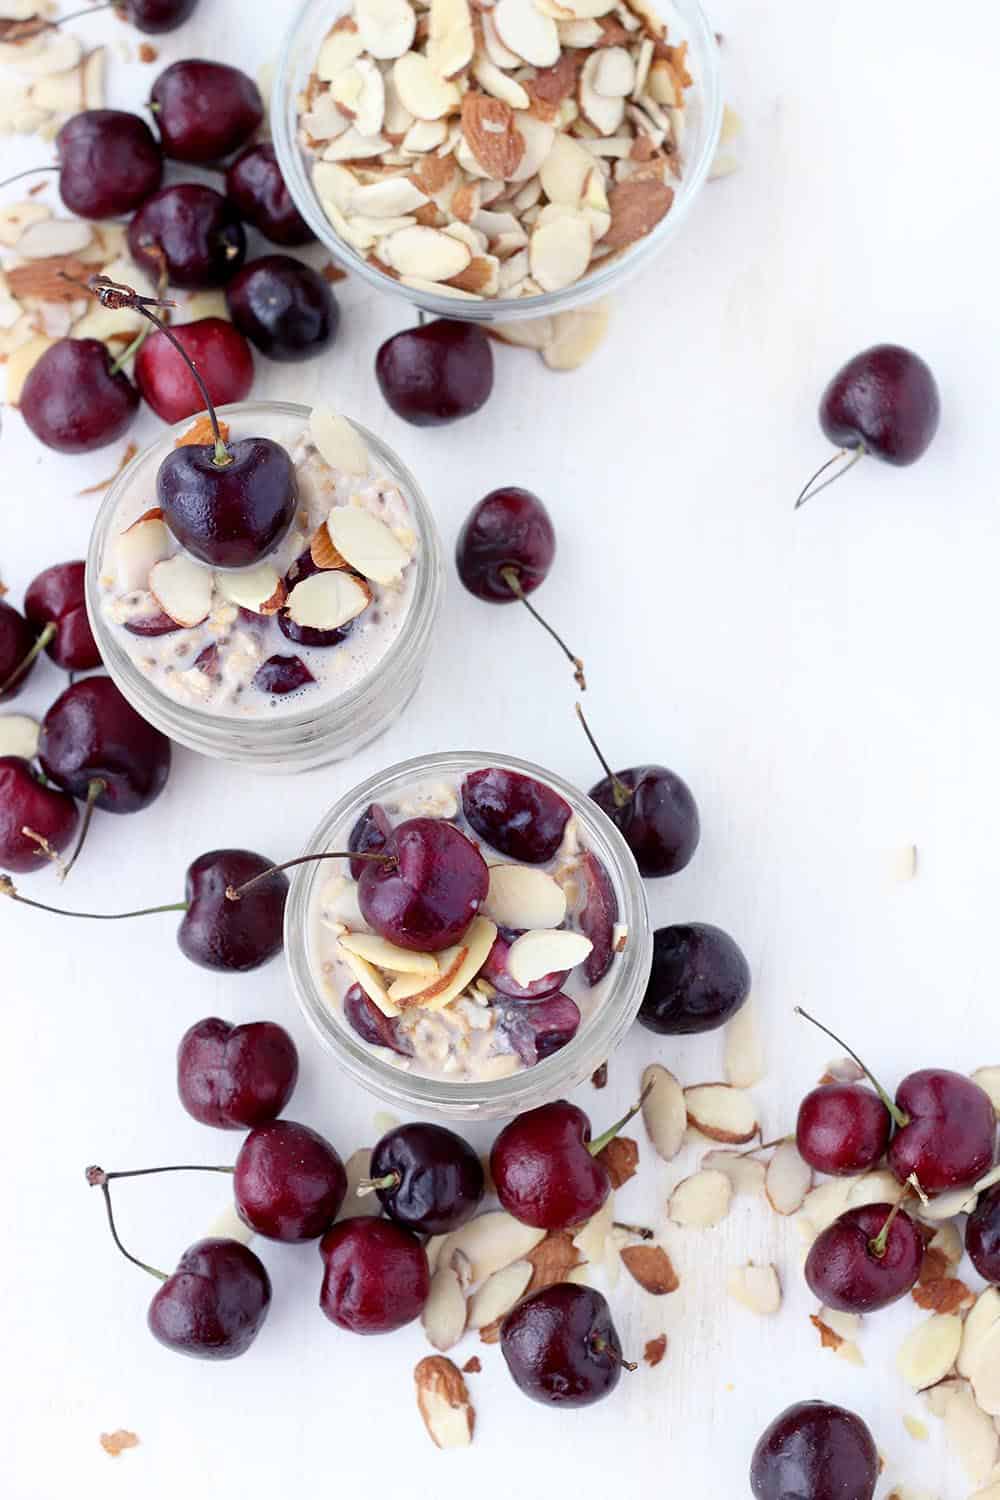 These Cherry Almond Overnight Oats taste decadent and creamy, but are completely dairy-free and naturally sweetened with honey or maple syrup. This recipe is great to make ahead for easy breakfasts all week long!